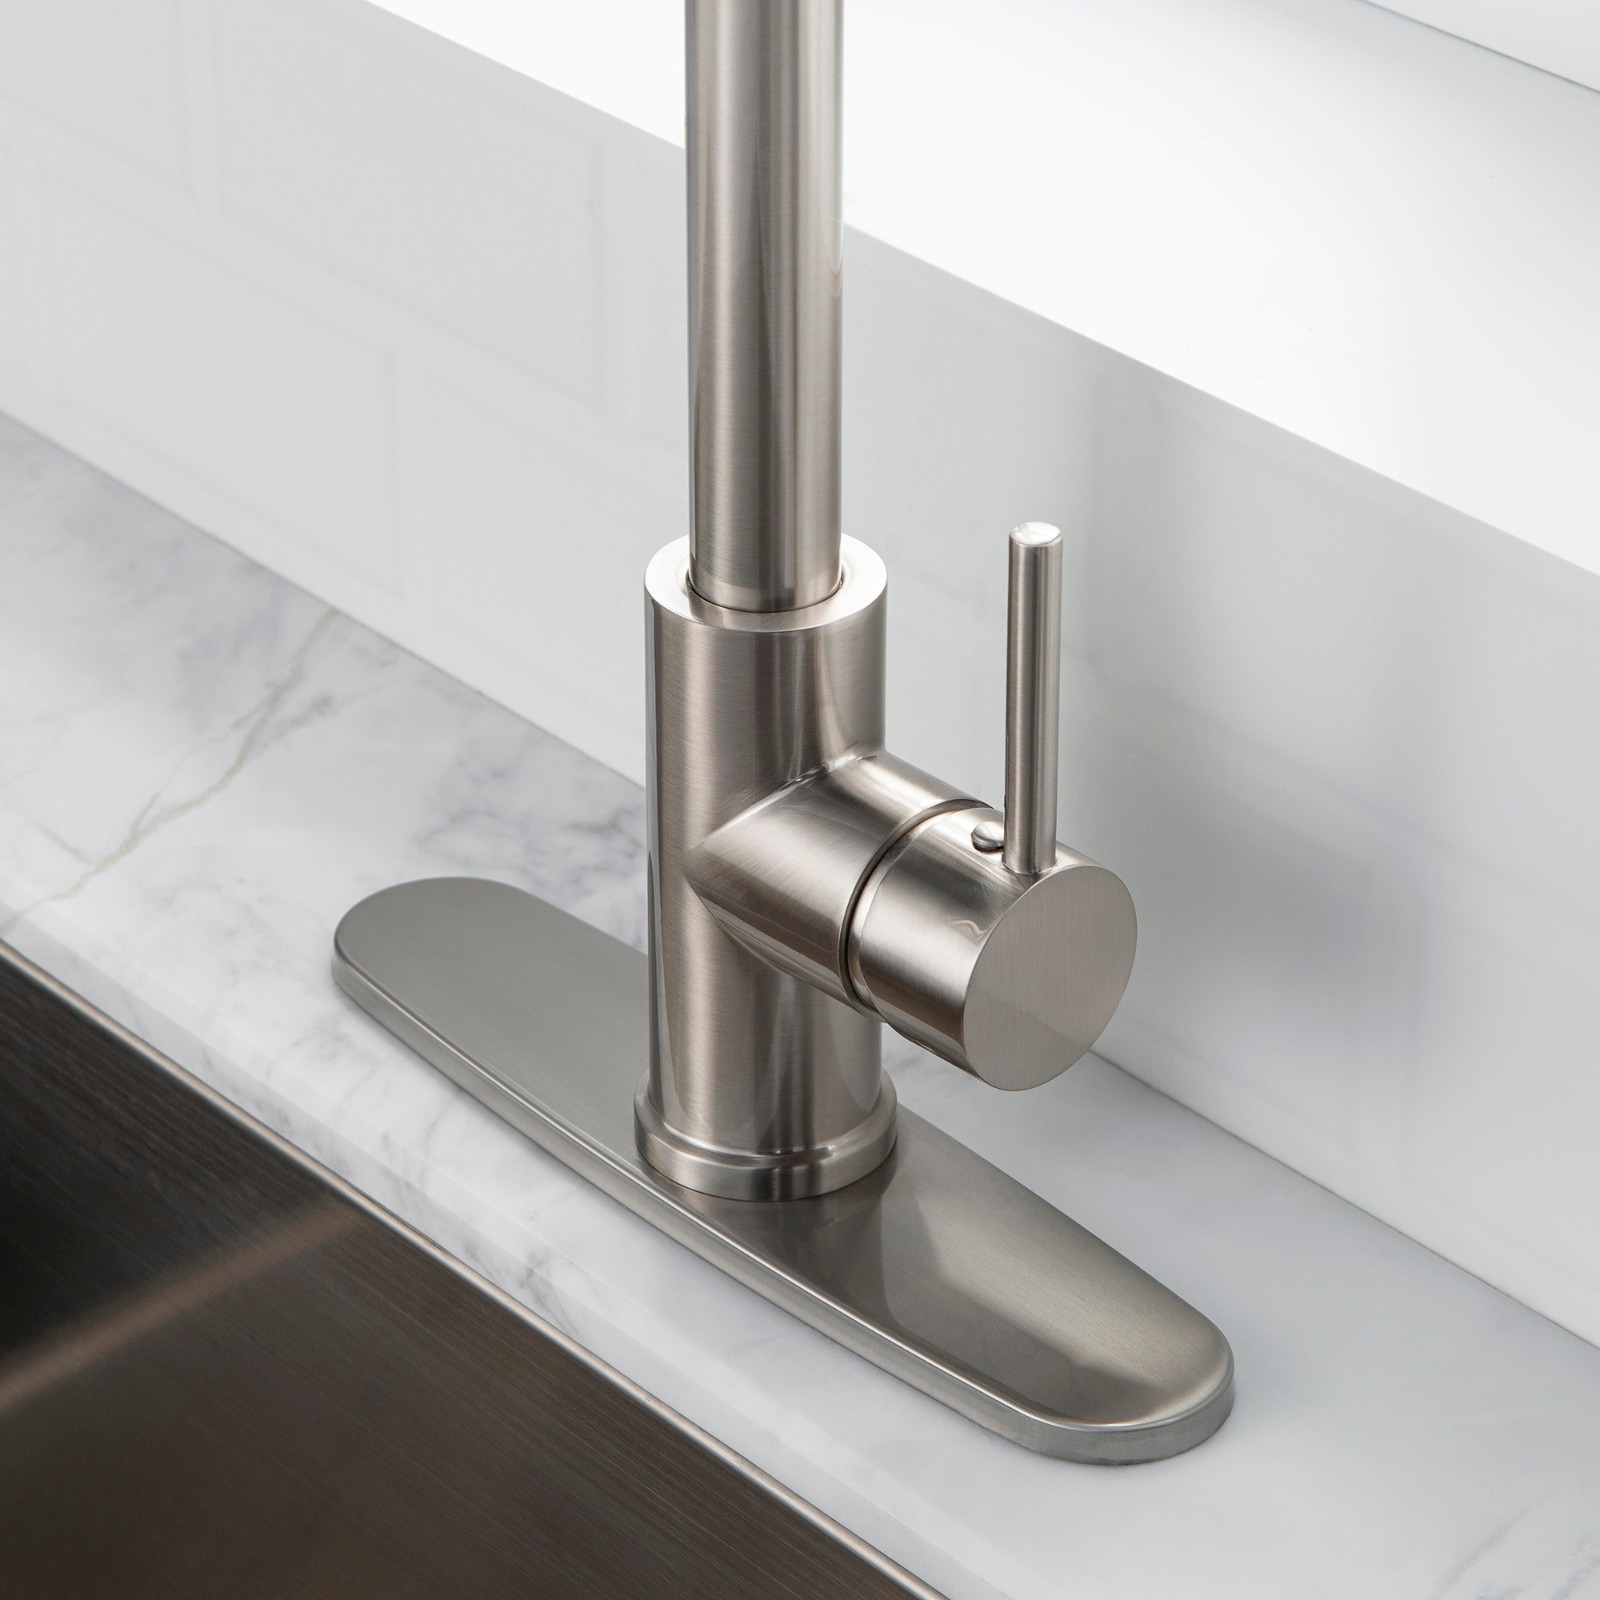  WOODBRIDGE WK090802BN Single Handle Pull Down Kitchen Faucet in Brushed Nickel Finish_5019